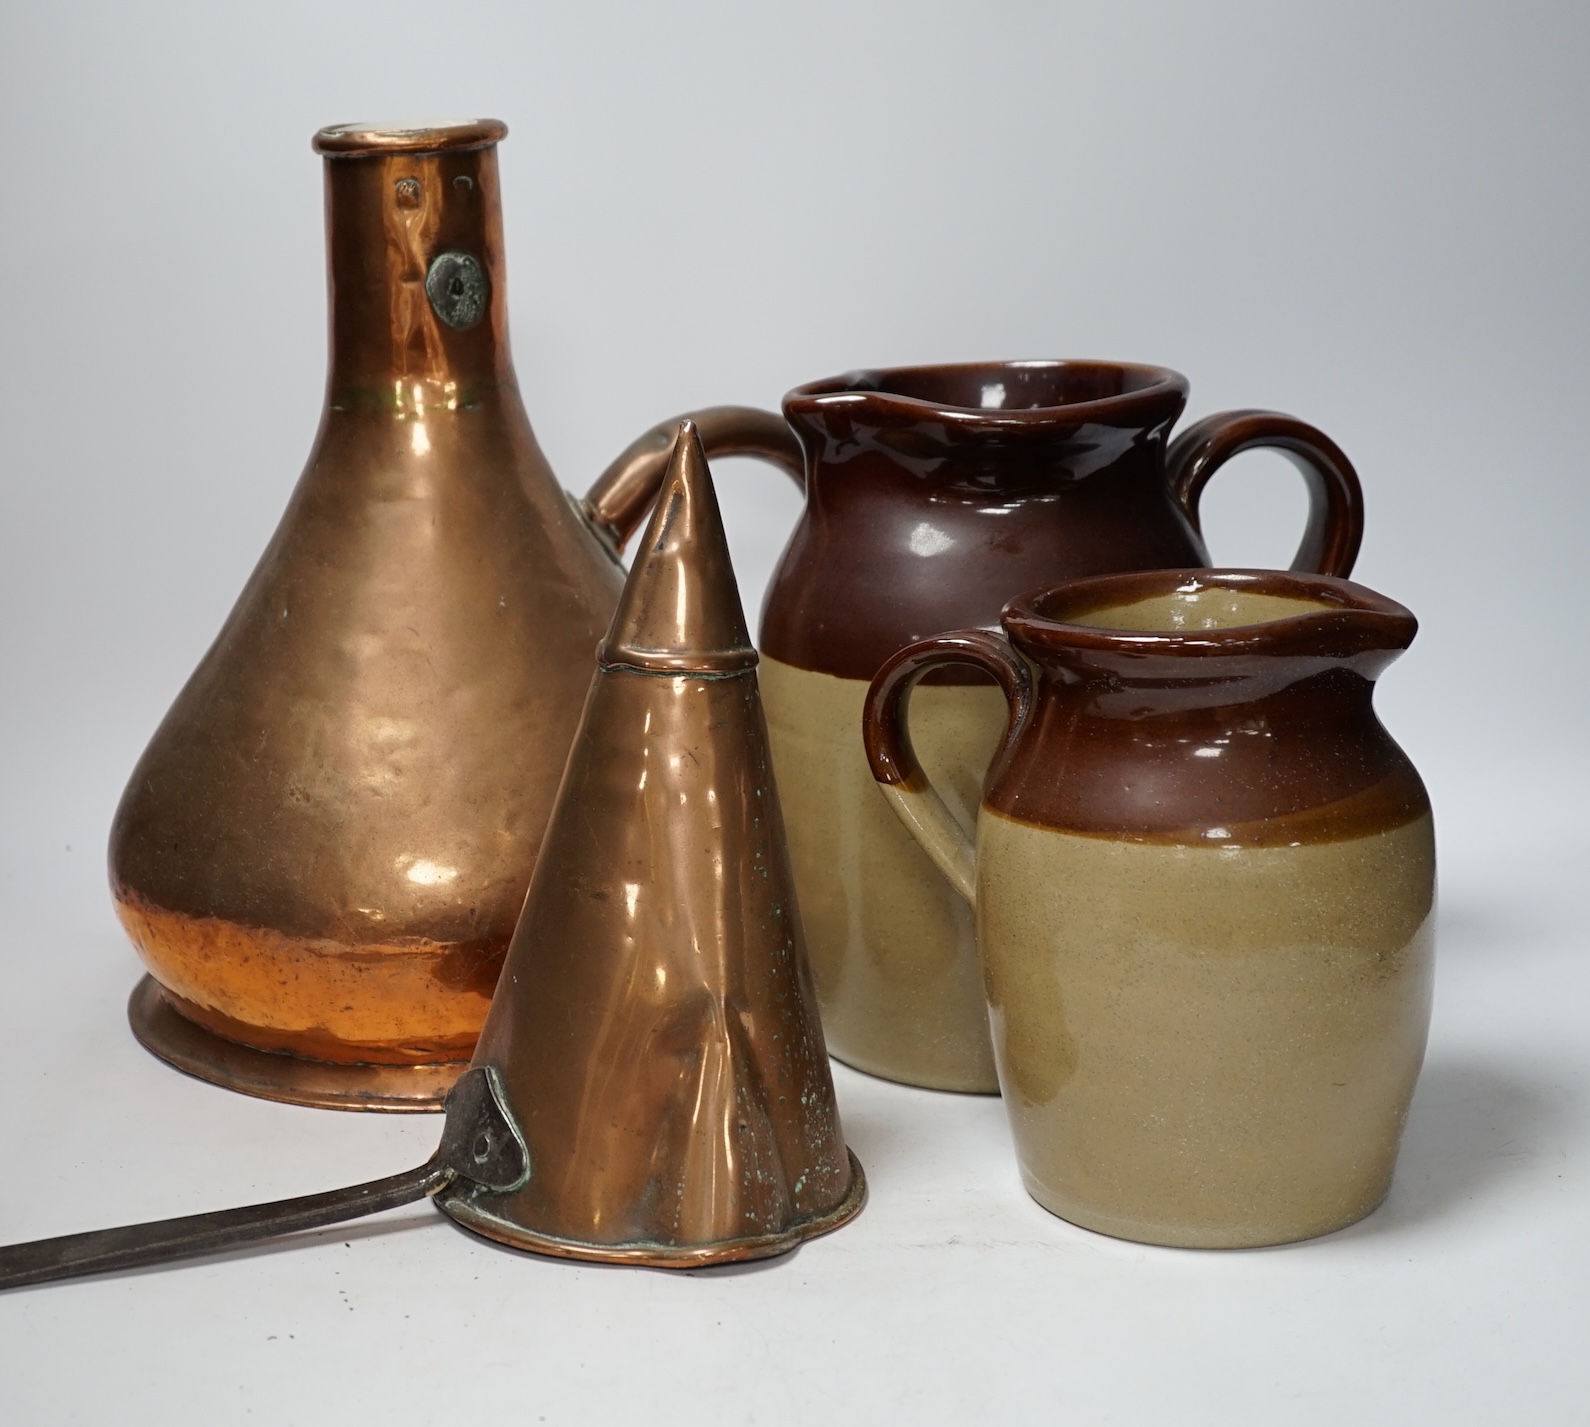 A group of 19th to early 20th century copper vessels, utensils and graduated brass weights (21)